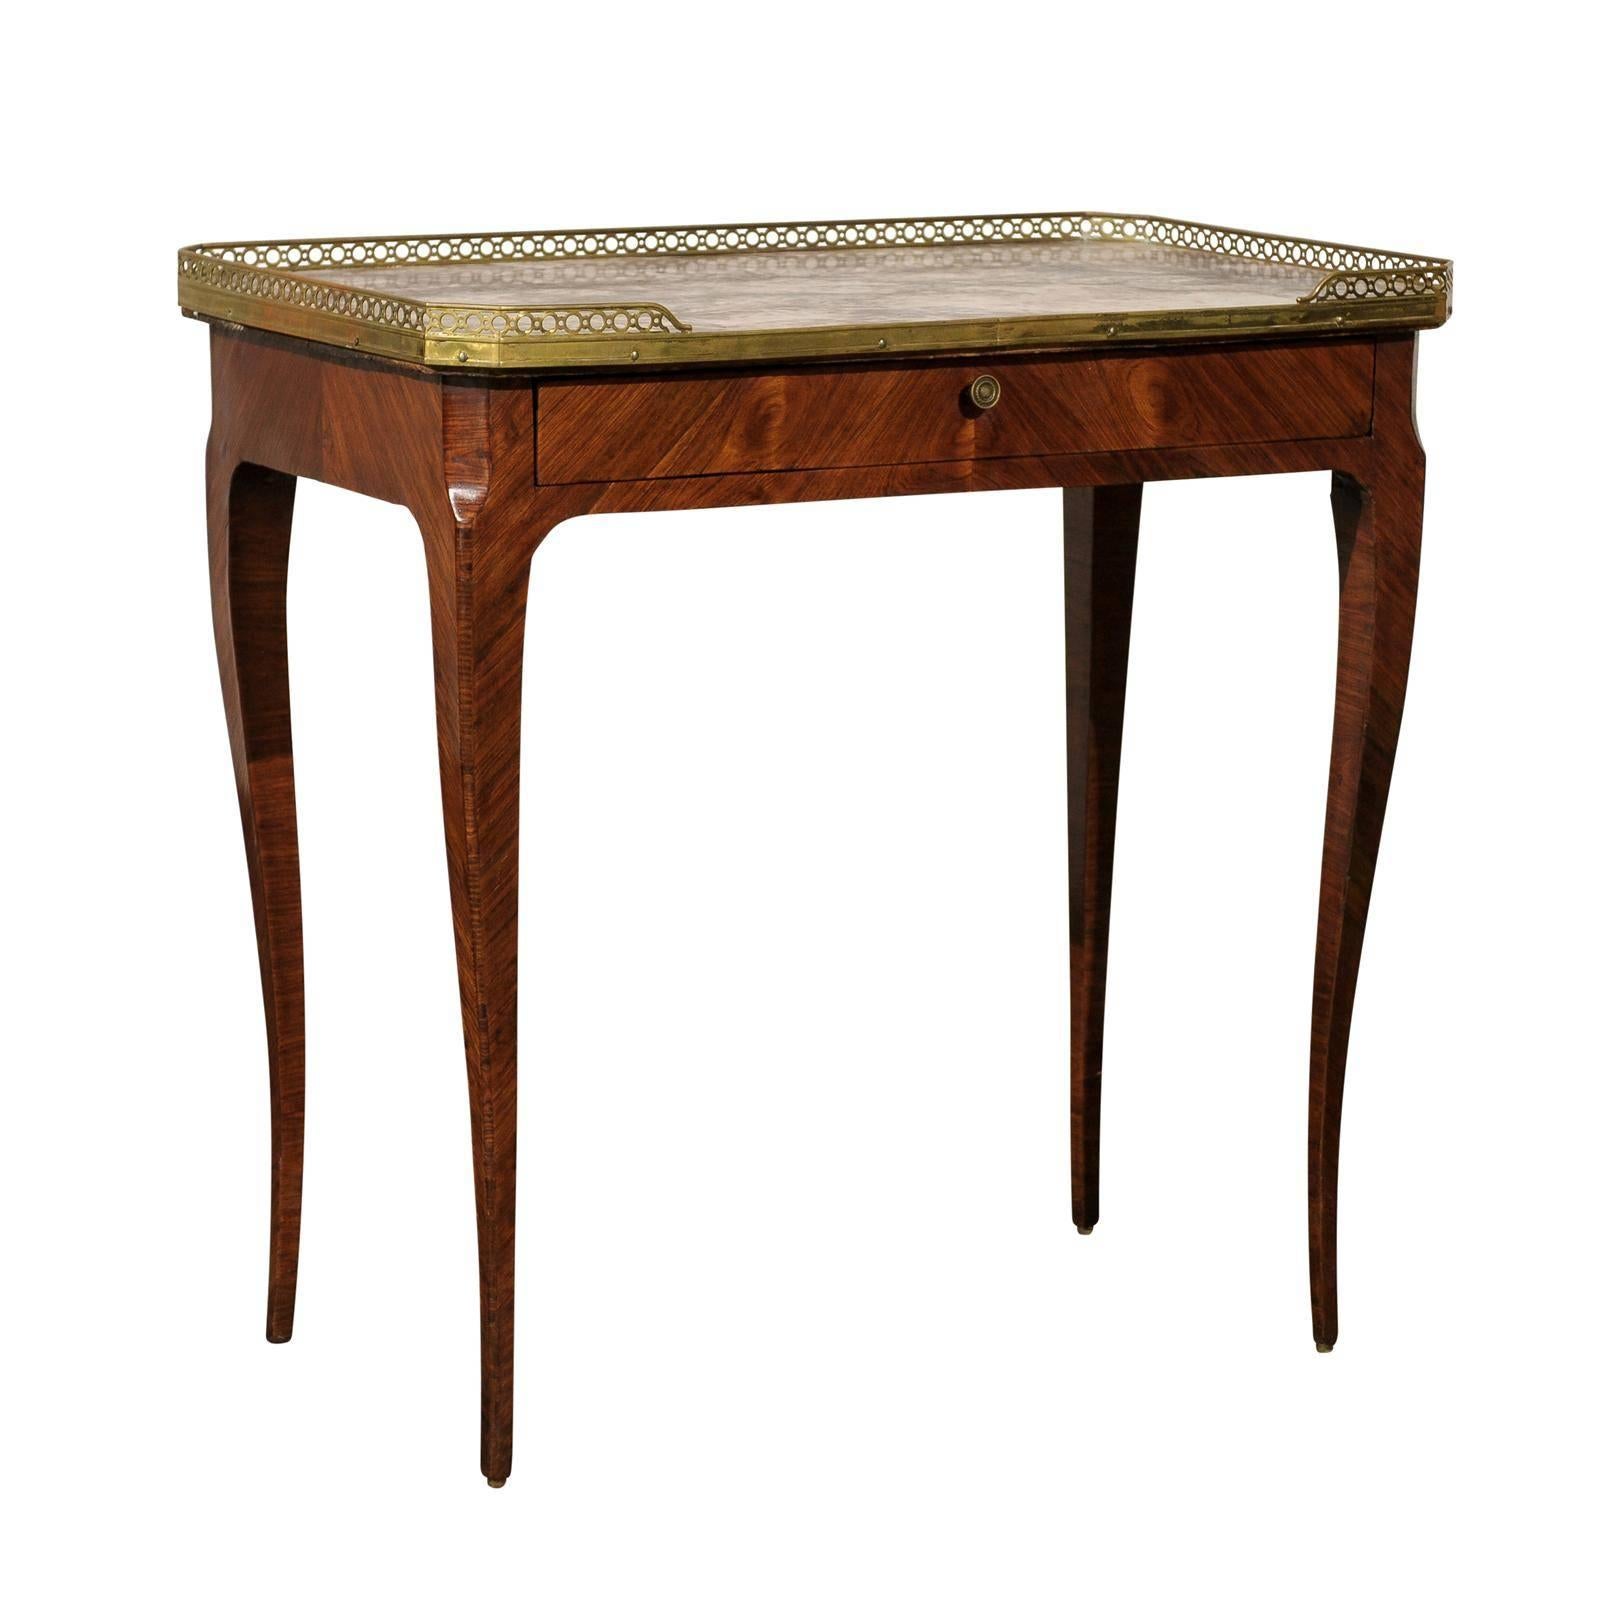 20th Century Louis XV Style Marble-Top Kingswood Table with Brass Gallery